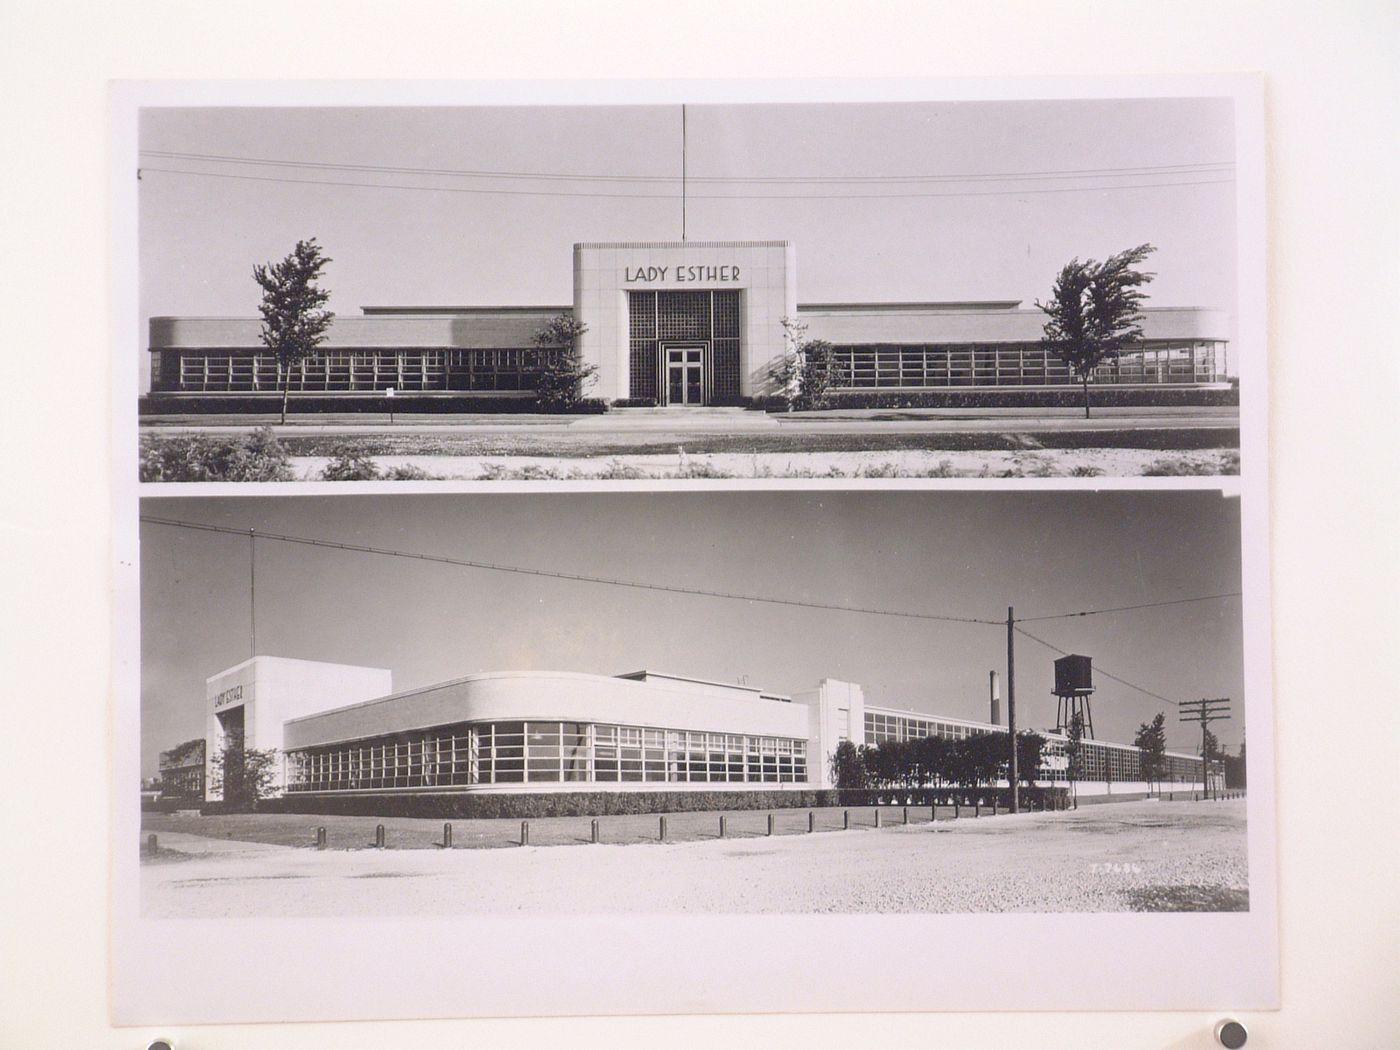 Views of the principal façade of the Administration Building and the lateral façades of the Administration Building and the Plant, Lady Esther Company, Chicago, Illinois